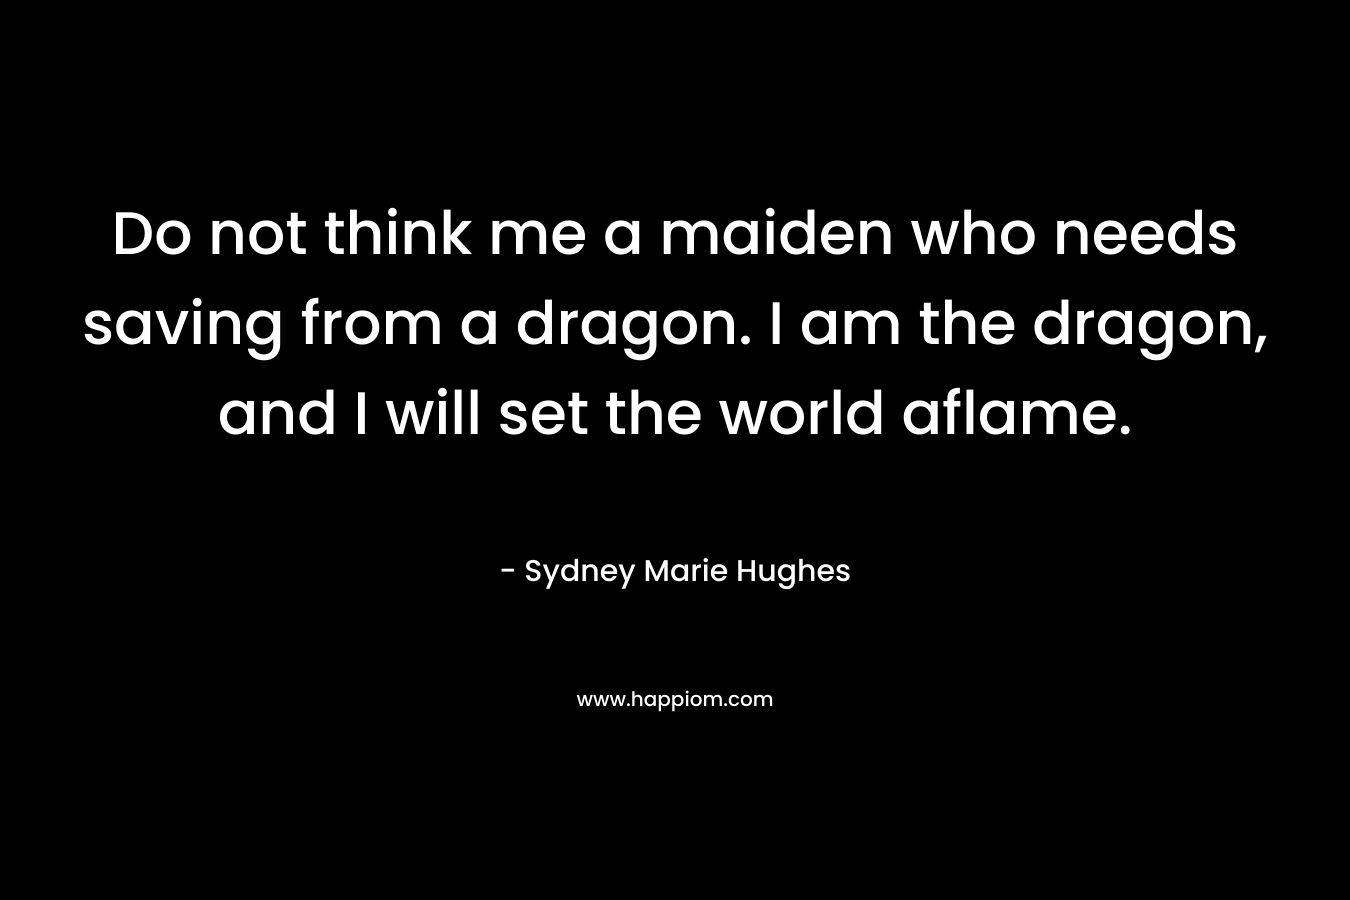 Do not think me a maiden who needs saving from a dragon. I am the dragon, and I will set the world aflame. – Sydney Marie Hughes